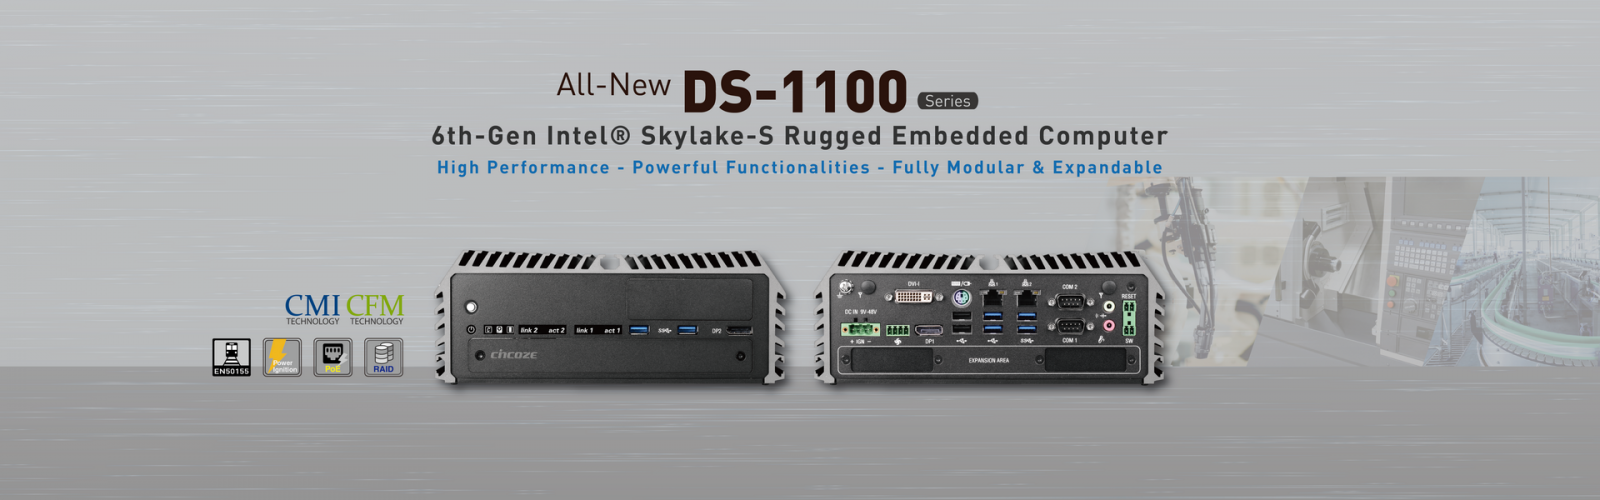 Cincoze DS-1100 Series Contributes High Performance, Powerful Functionalities and Fully Modular Design to the World!